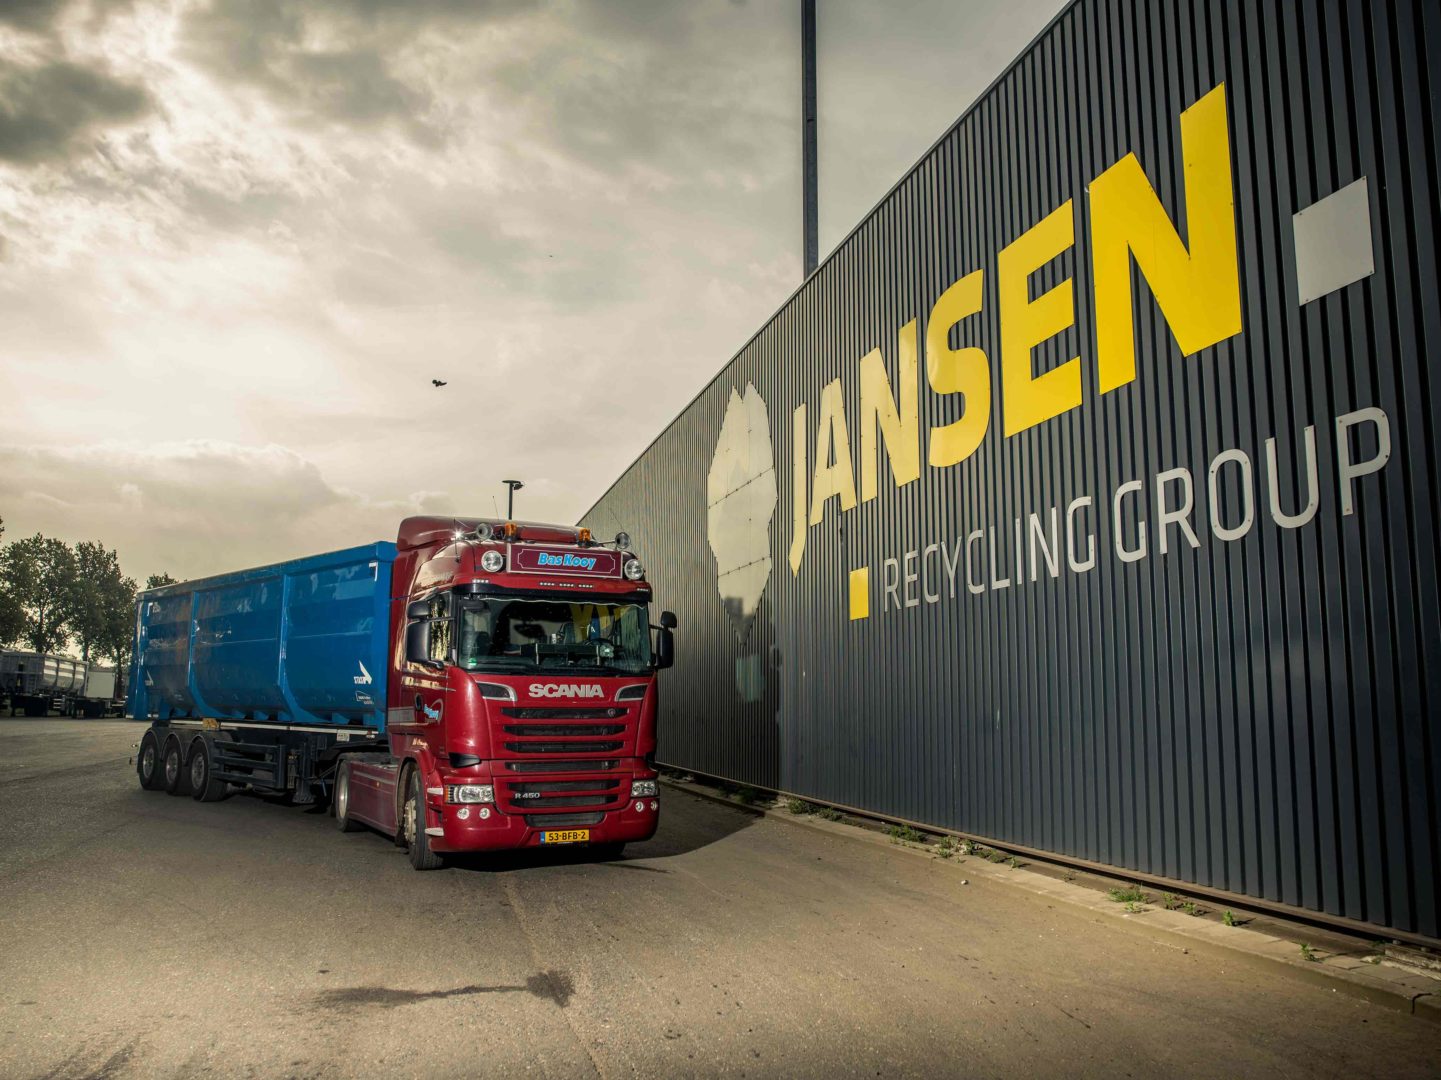 Truck (Bas Kooy) by Jansen Recycling Group